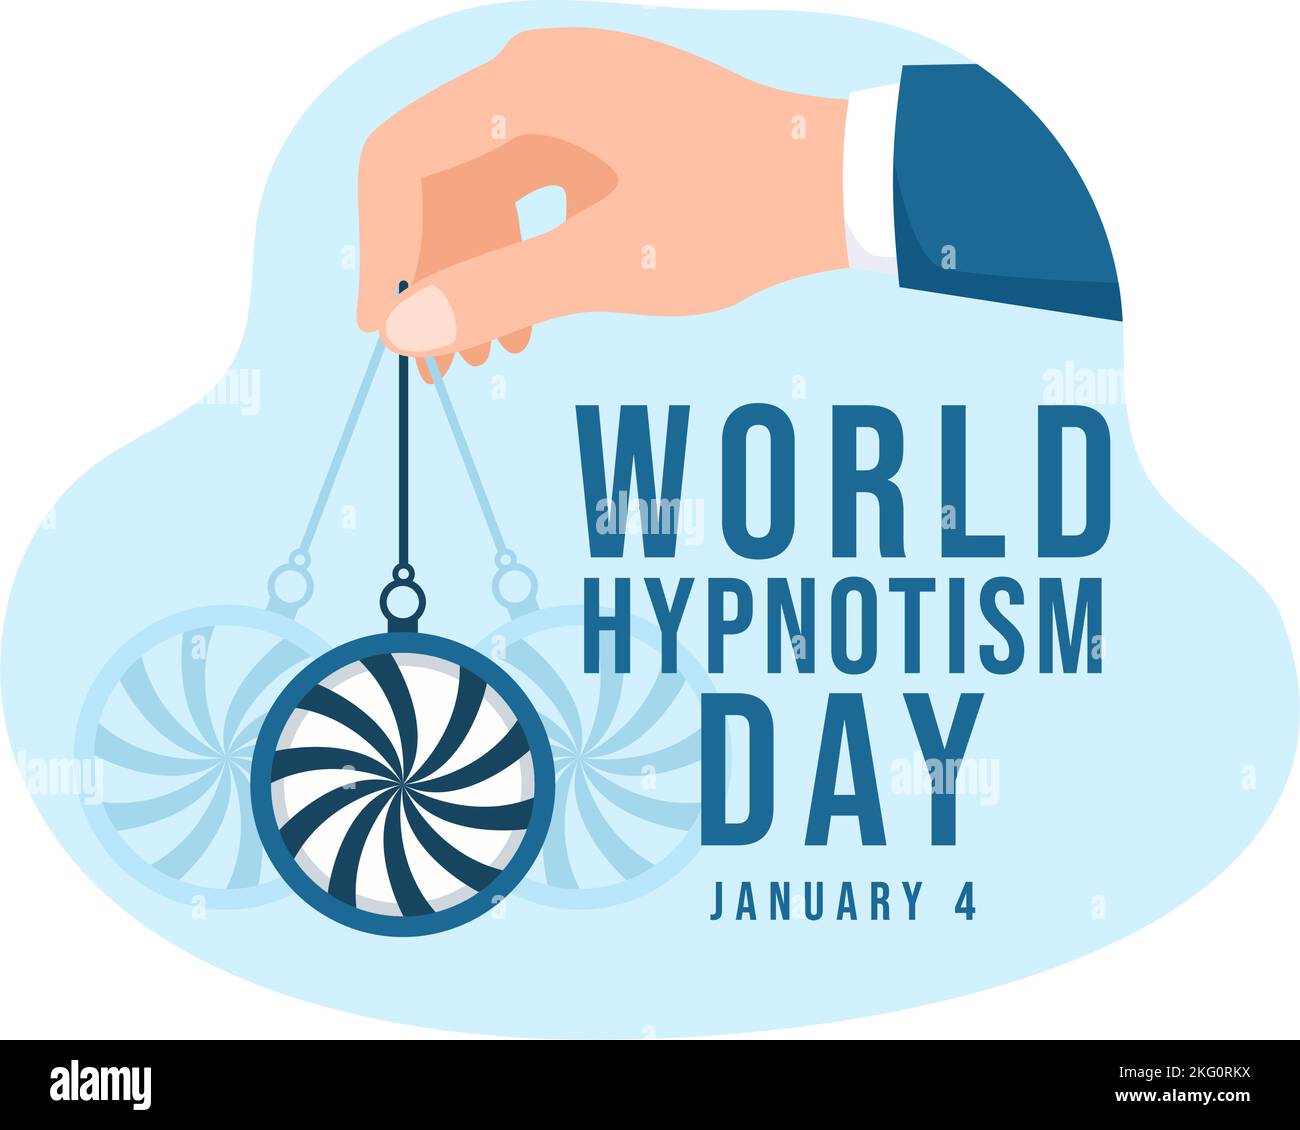 World Hypnotism Day with Black and White Spiral, Altered State of Mind, Hypnosis Treatment Service in Flat Cartoon Hand Drawn Templates Illustration Stock Vector